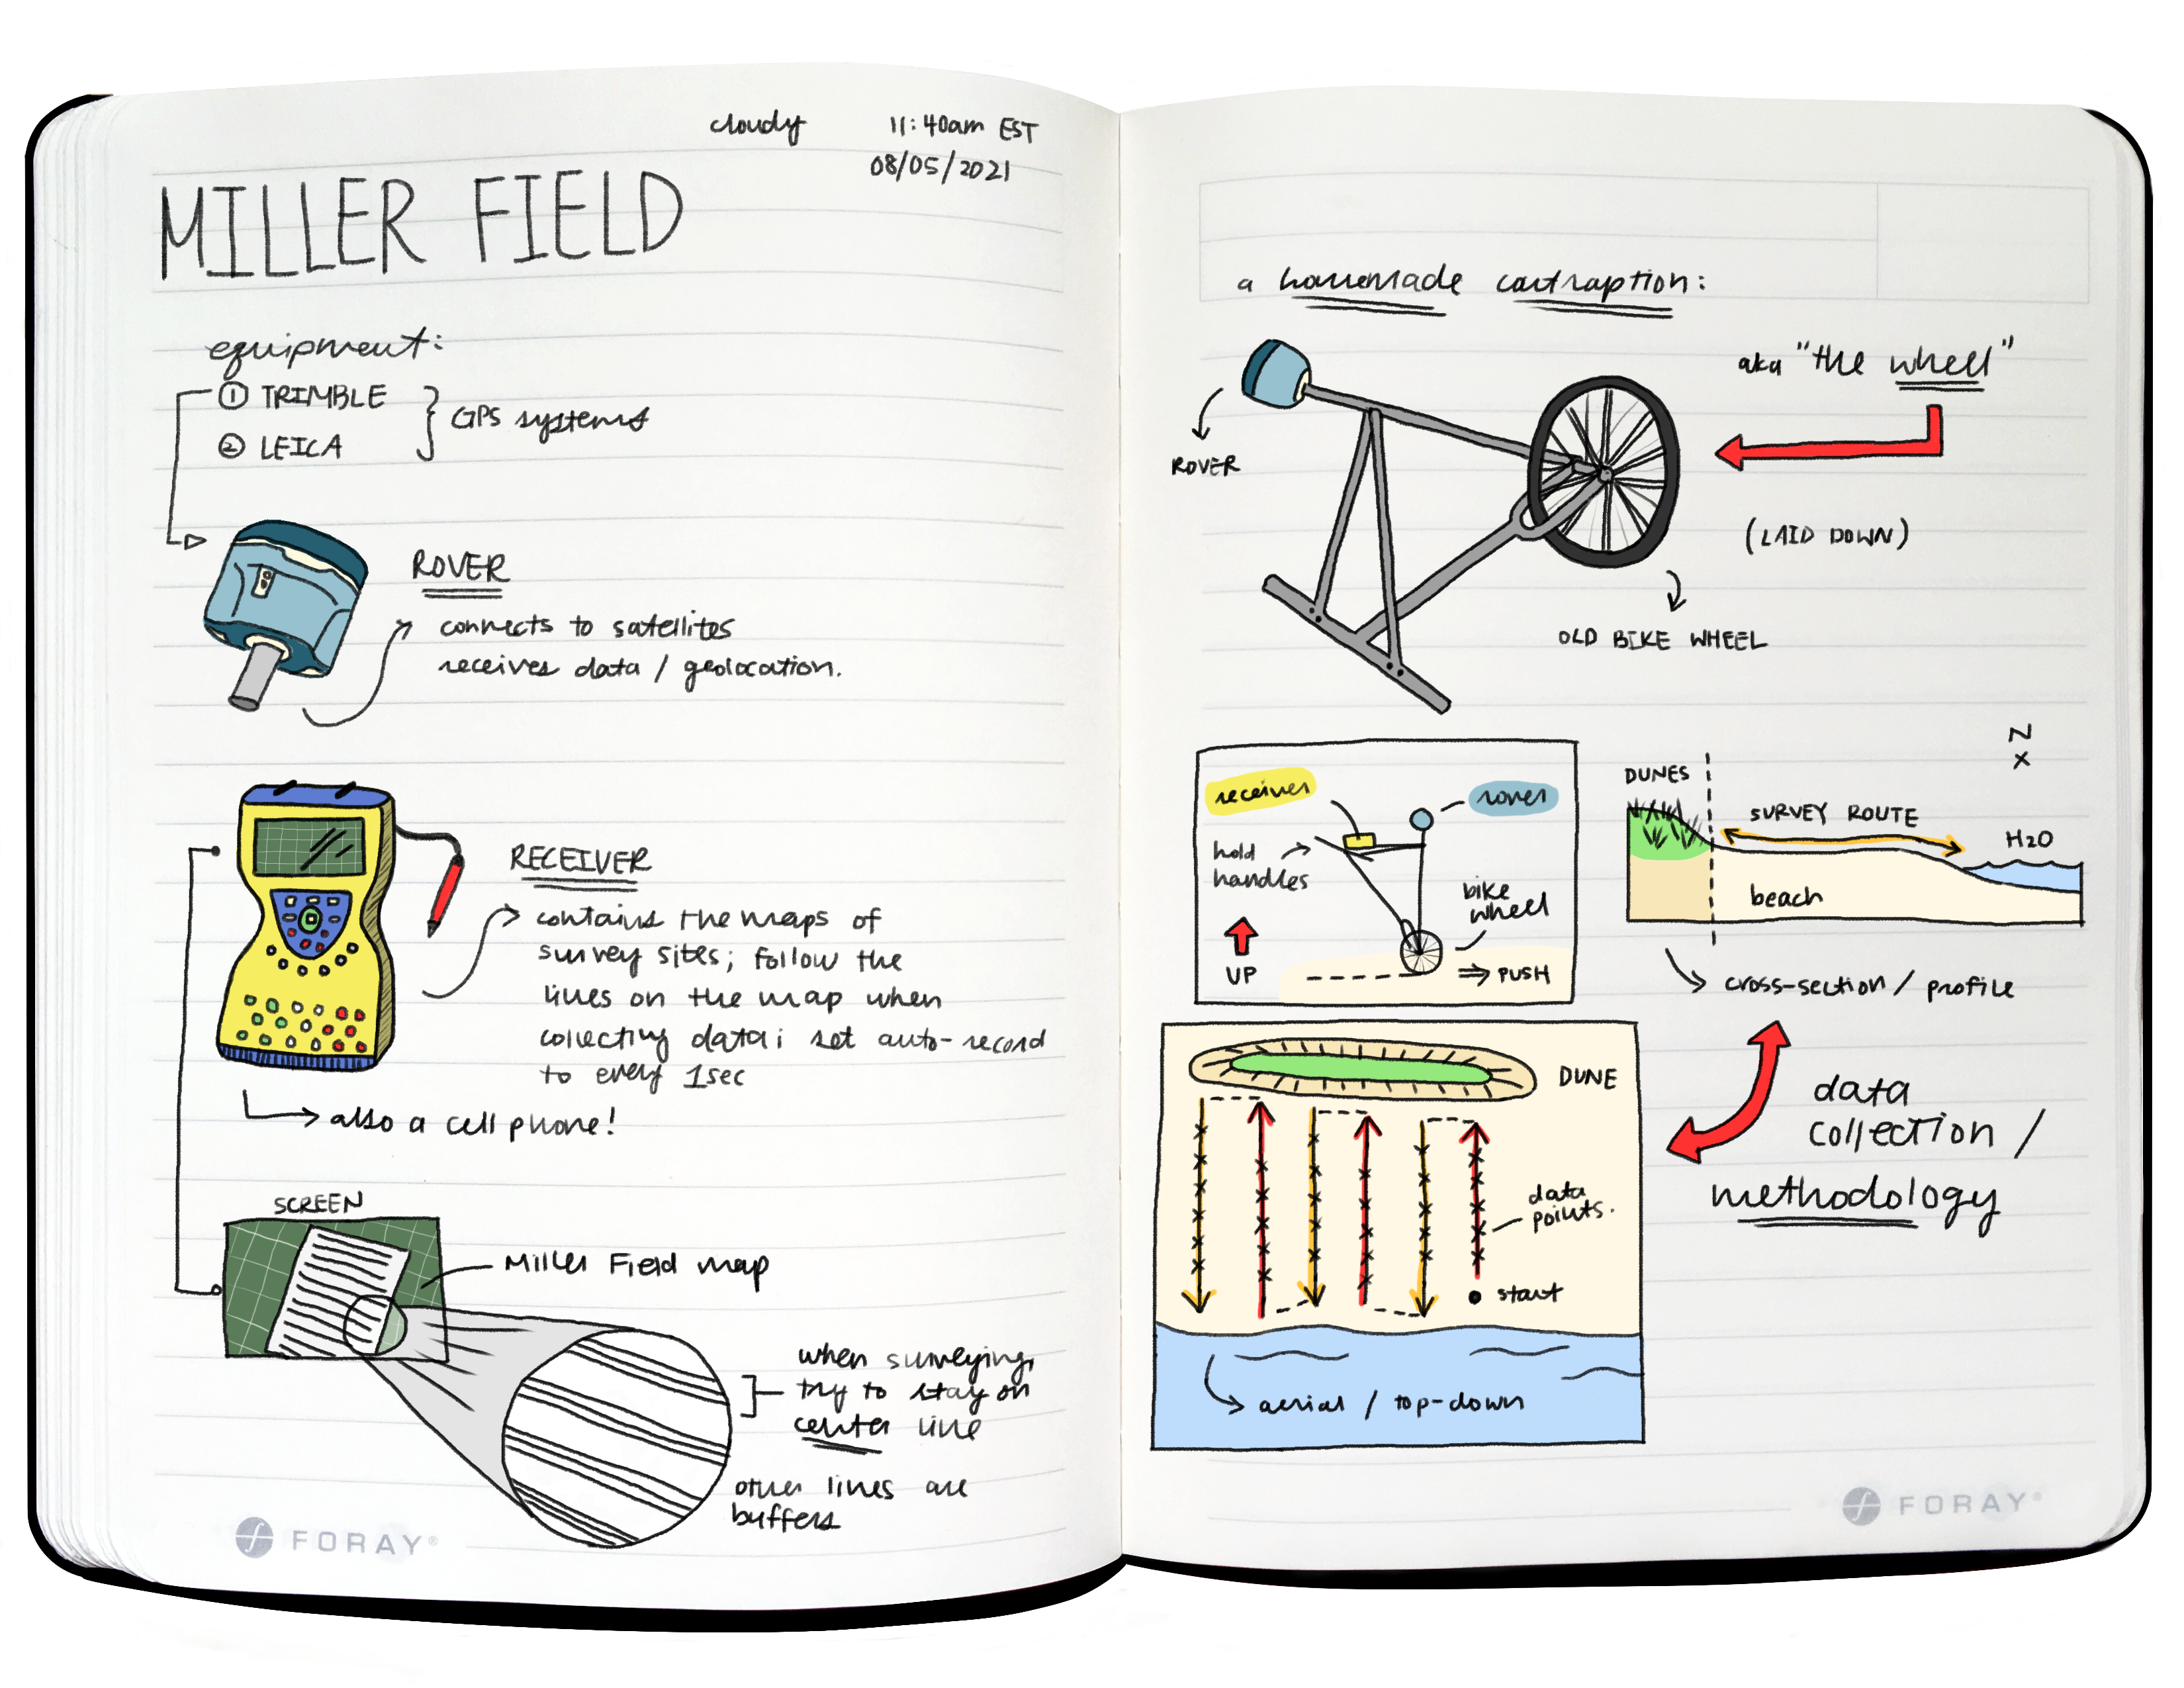 A two-page spread of a field journal with colored illustrated diagrams and handwritten notes